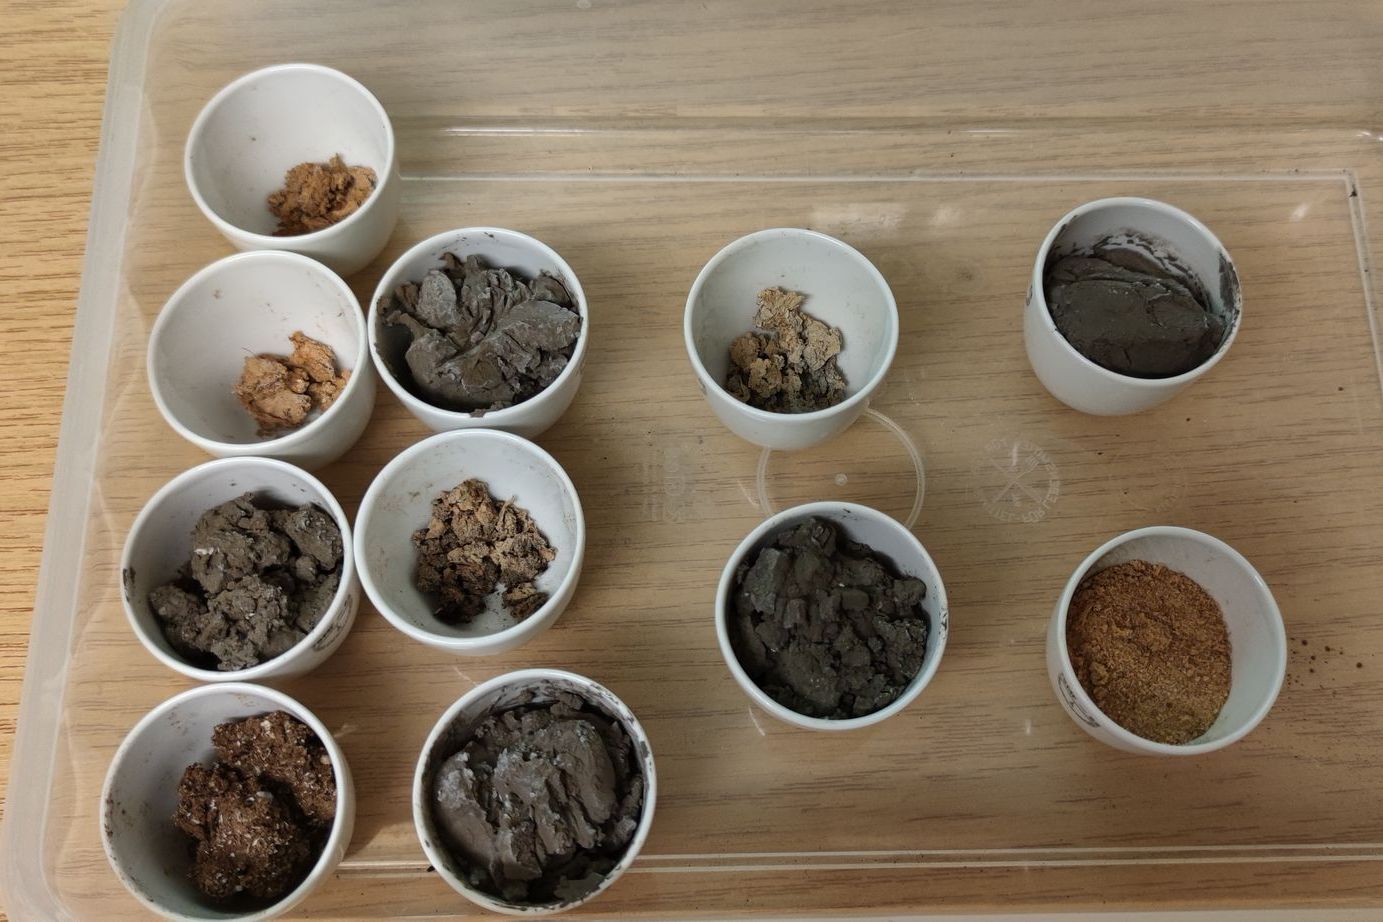 Soil samples in crucibles after annealing in a muffle furnace at 550 C.